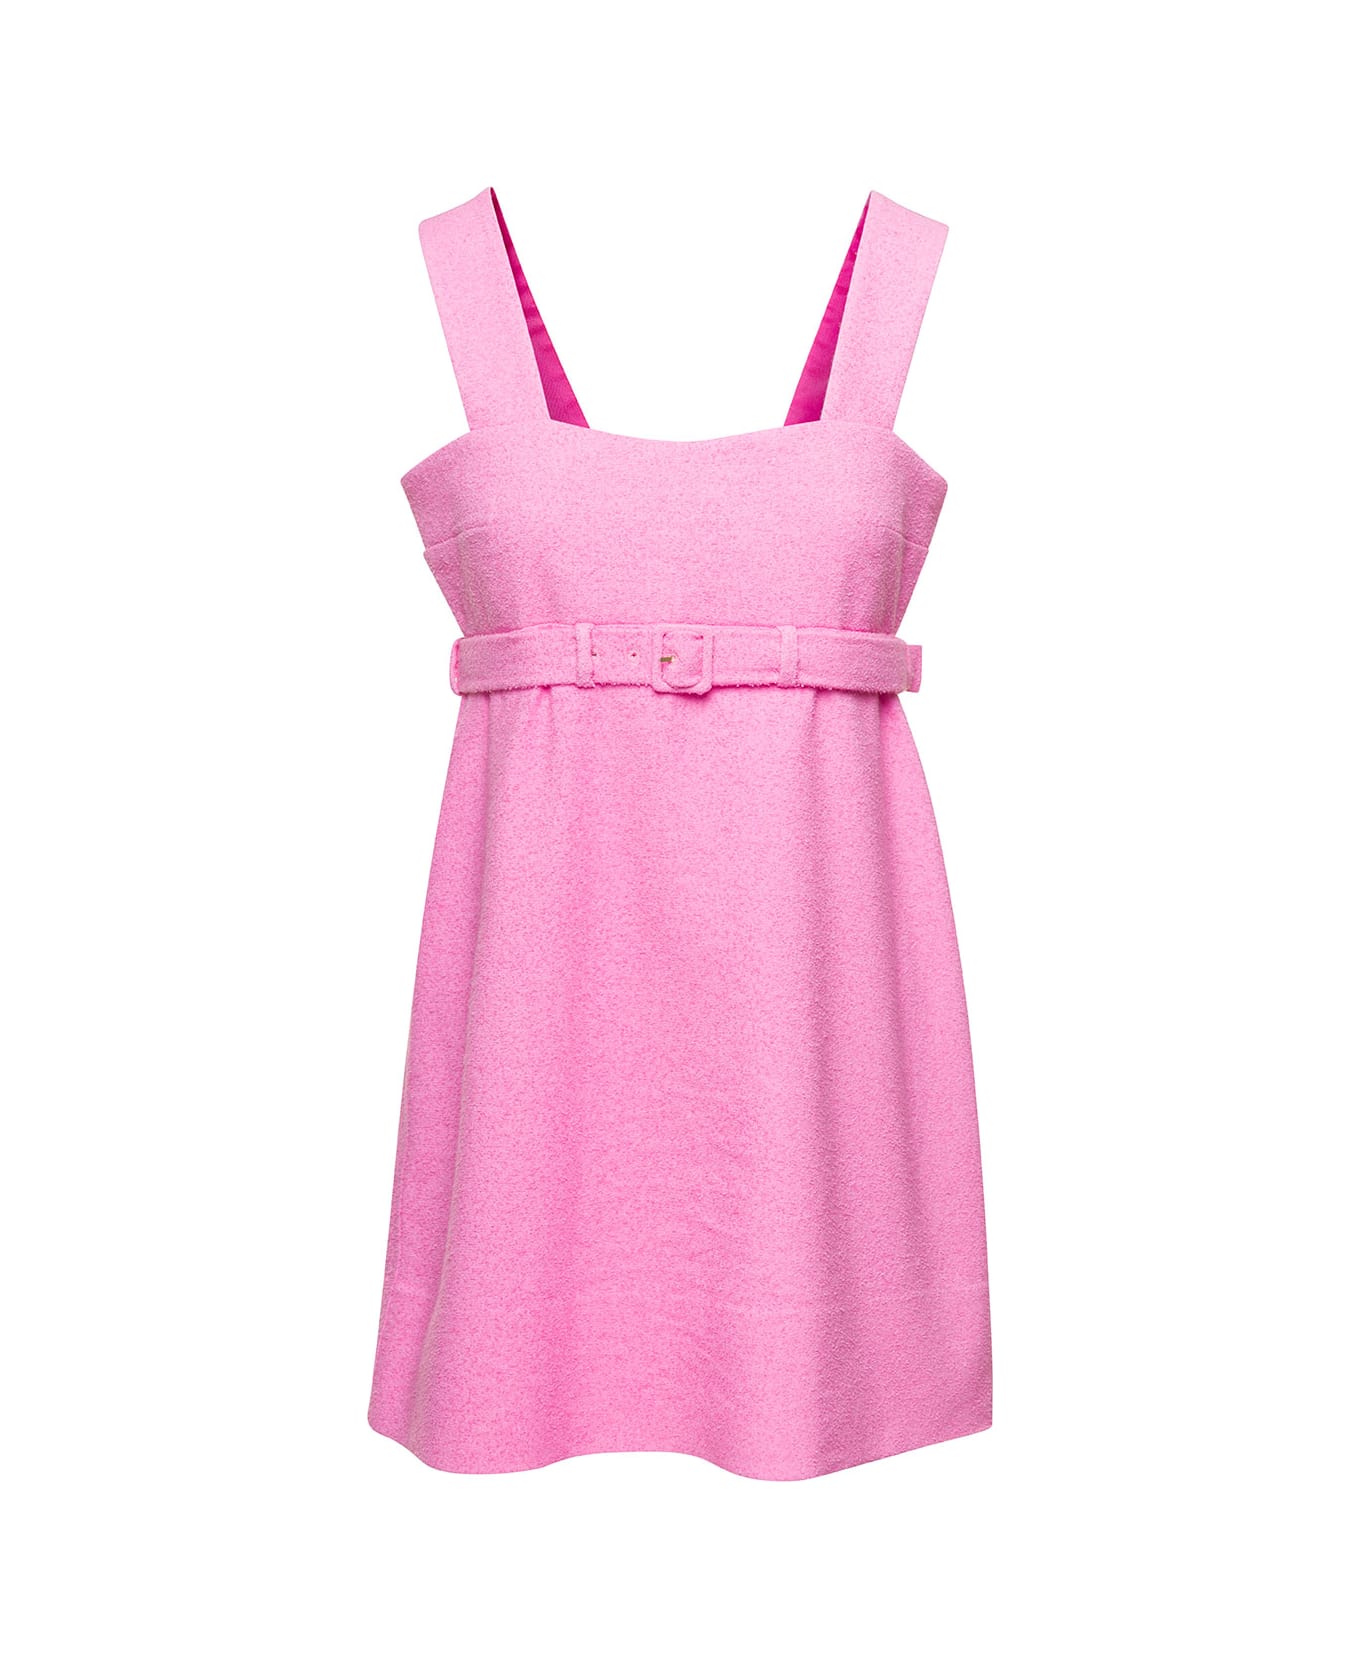 Patou Pink Corsage Belted Minidress In Cotton Blend Woman - Pink